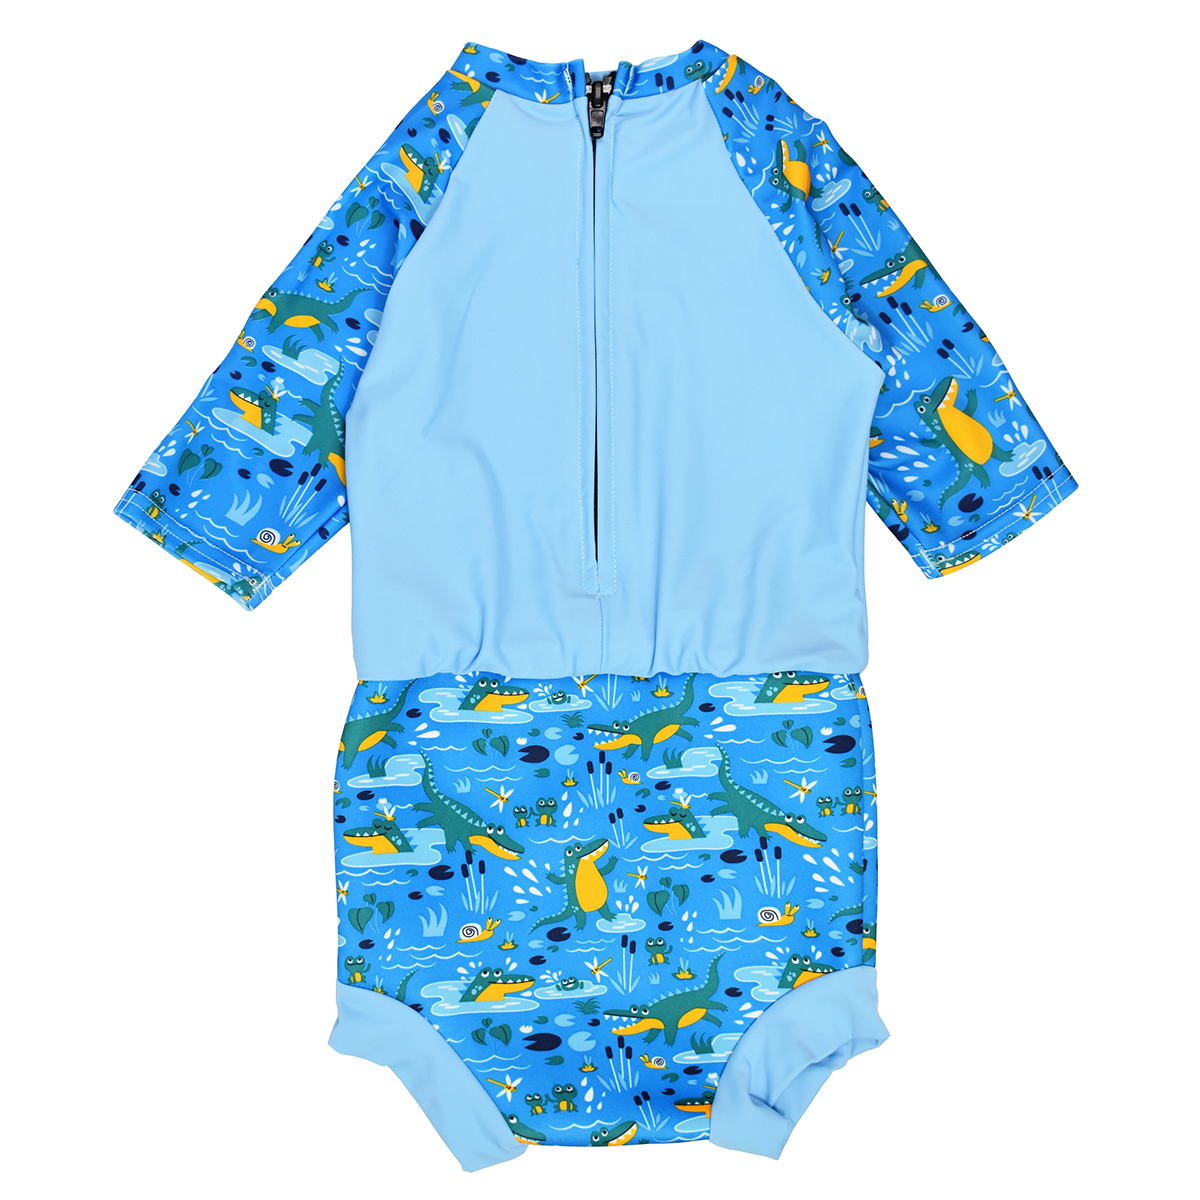 Happy Nappy Sunsuit in blue and swamp themed print, including crocodiles, snails, fireflies, frogs and more. Back.